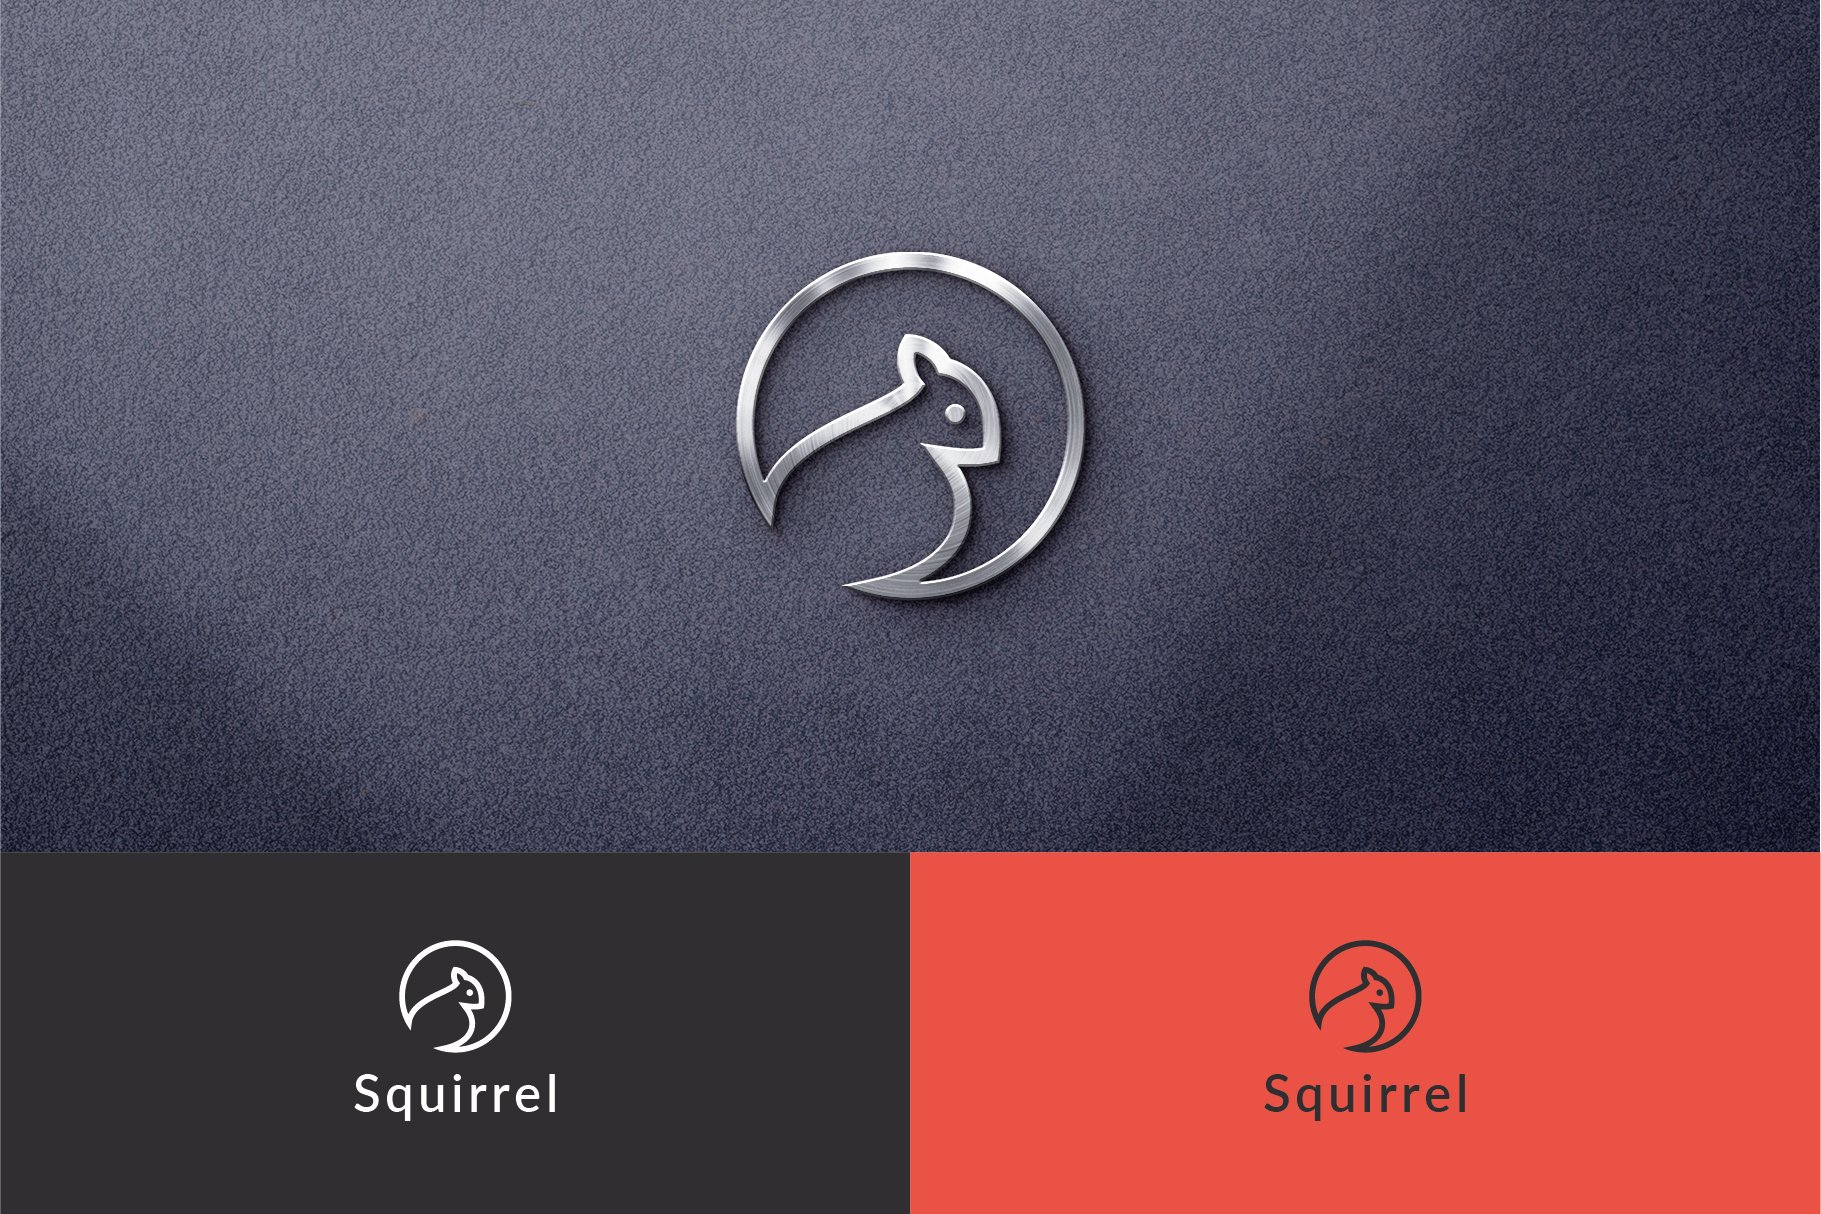 Squirrel Logo Template cover image.